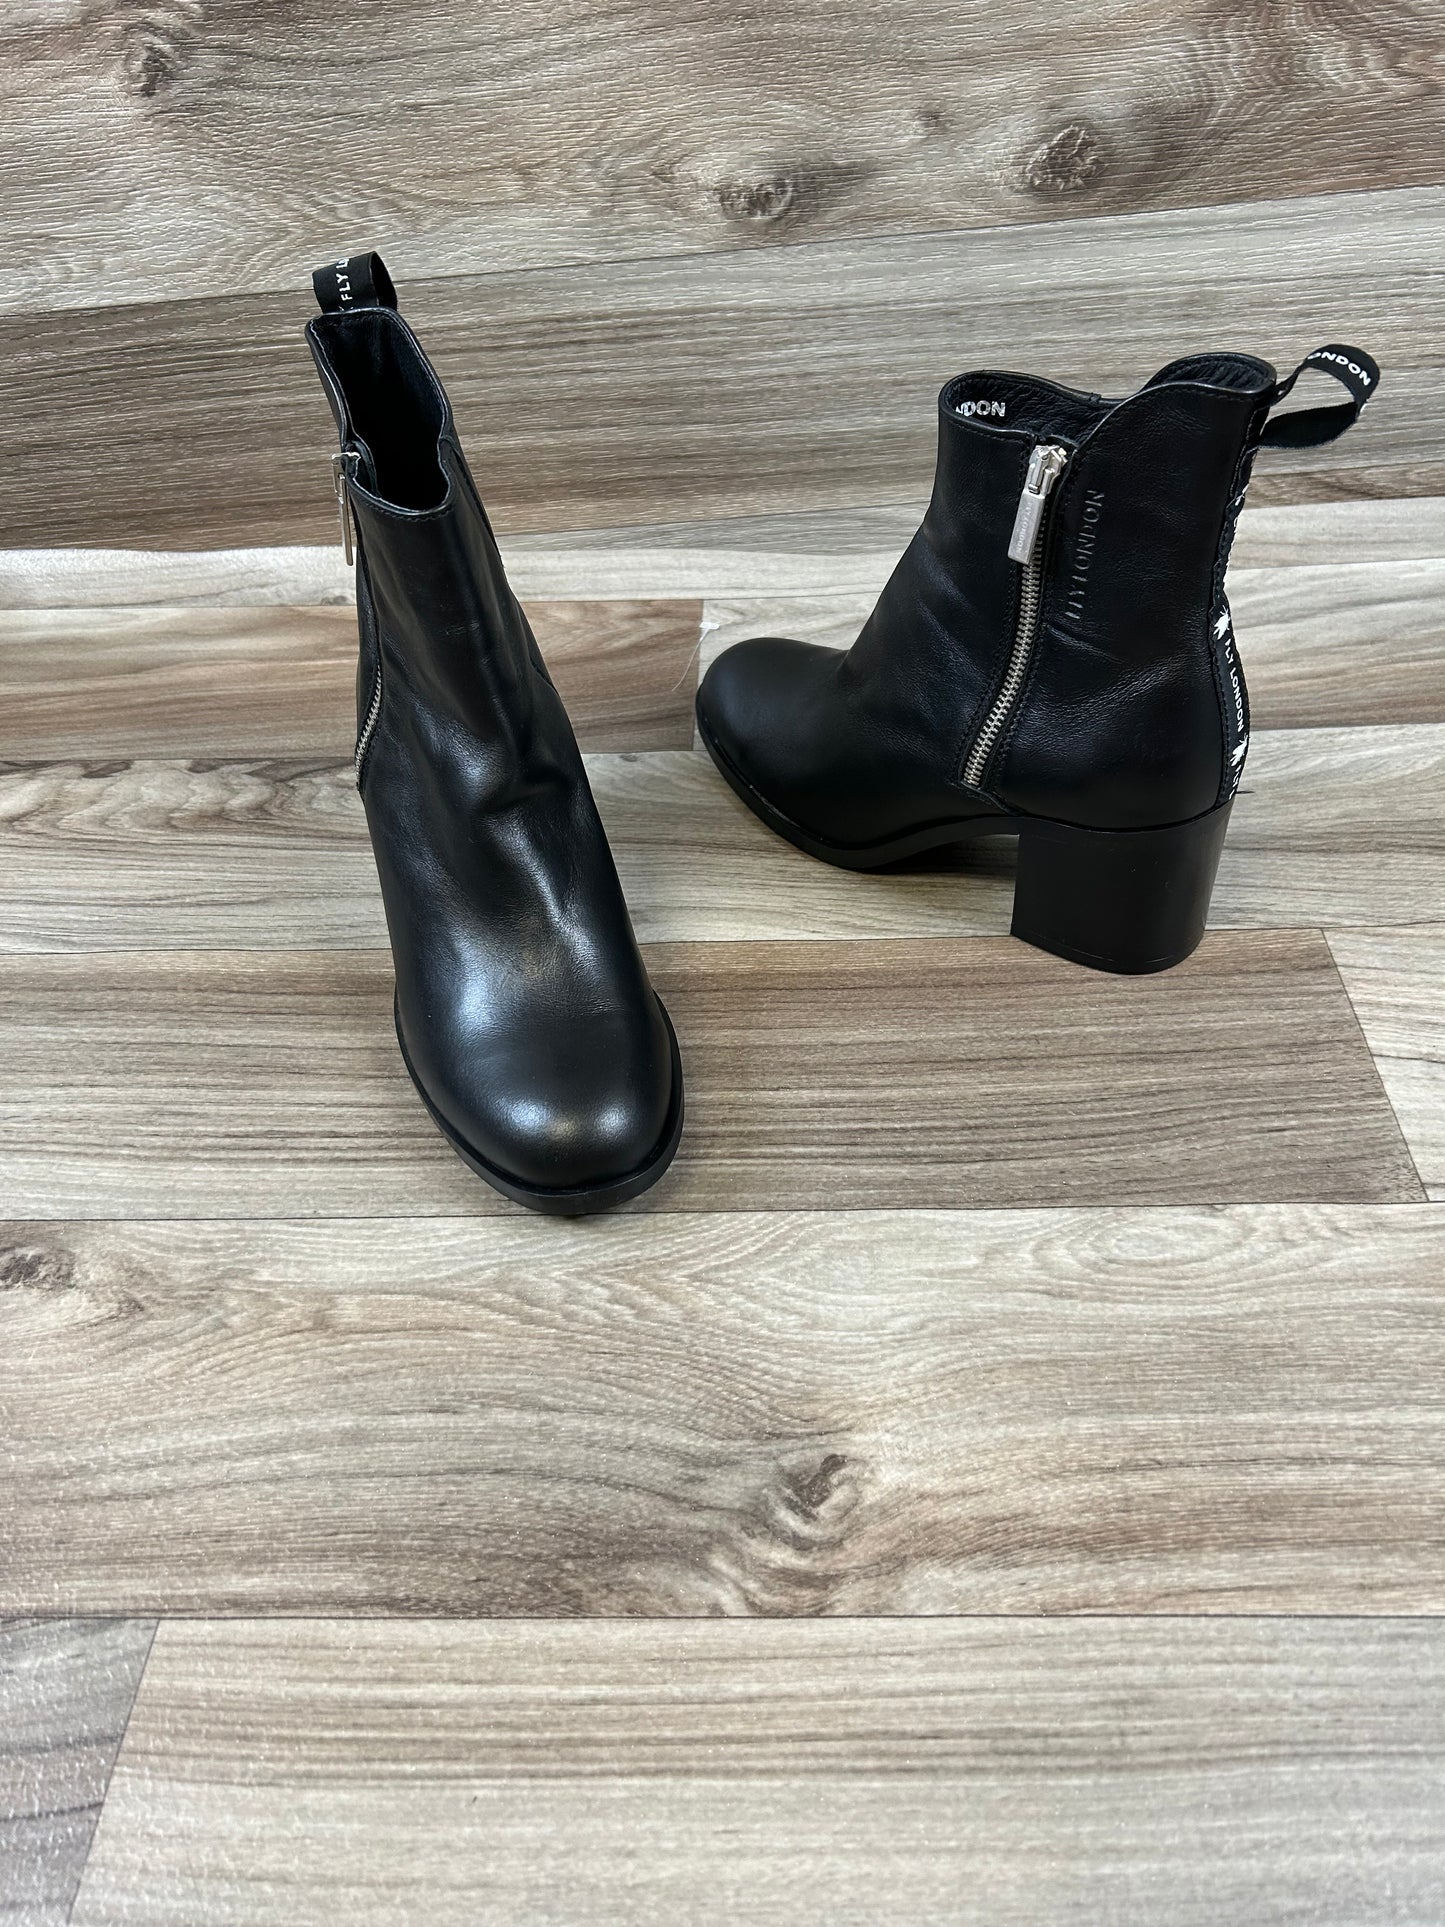 Boots Ankle Heels By Fly London  Size: 7.5